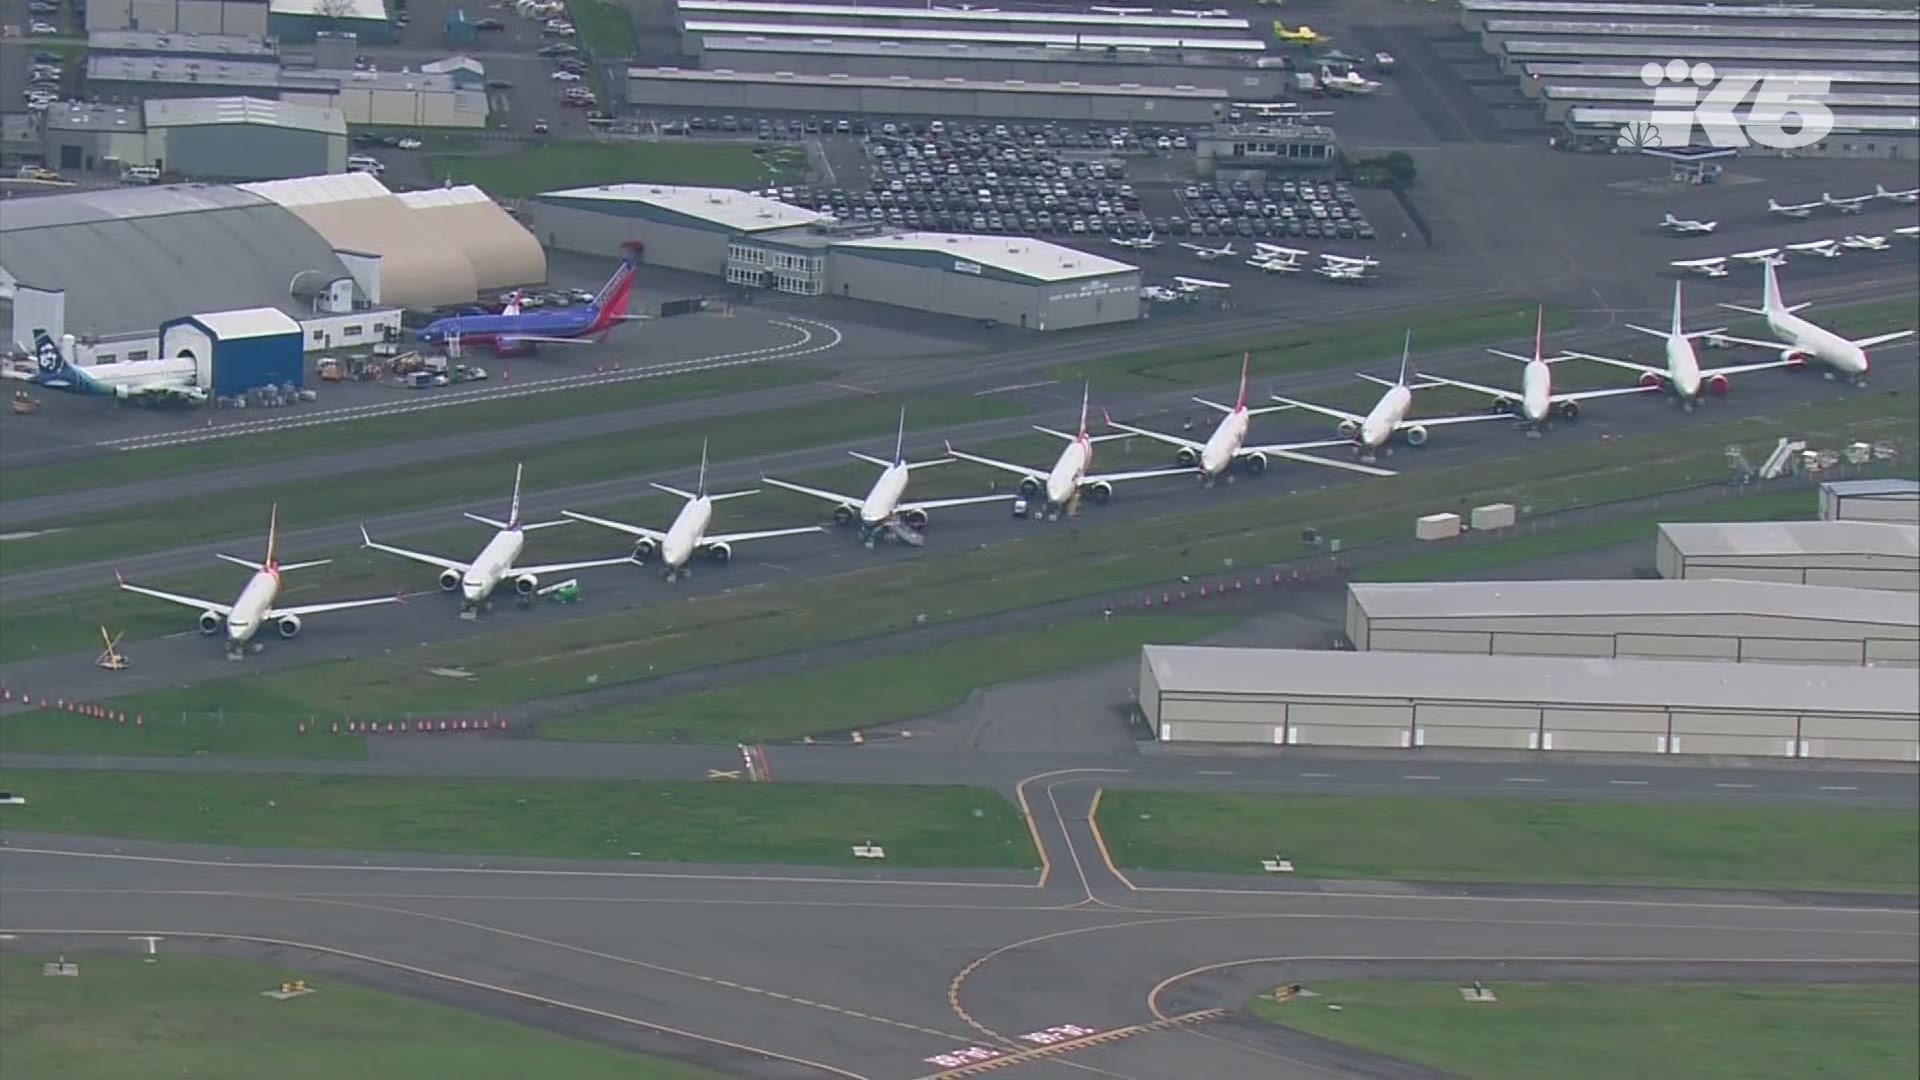 About 10 Boeing 737 MAX planes are being stored at Paine Field in Everett after the U.S. grounded the aircraft last month.